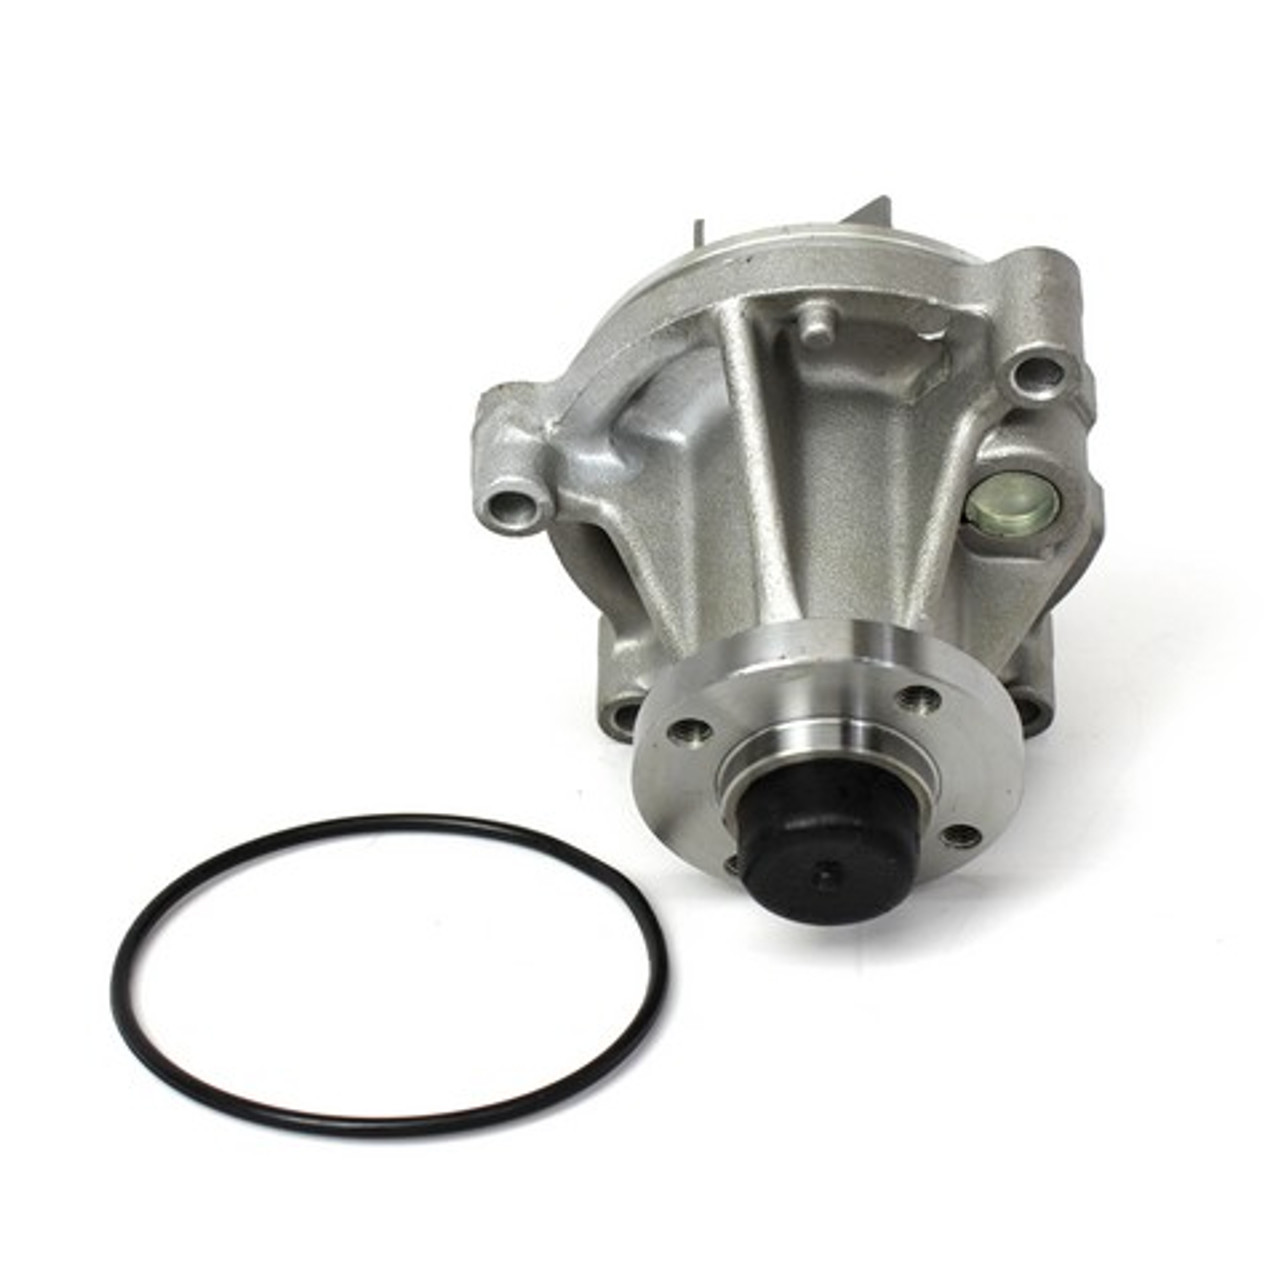 Water Pump 5.4L 2010 Ford E-150 - WP4170.22